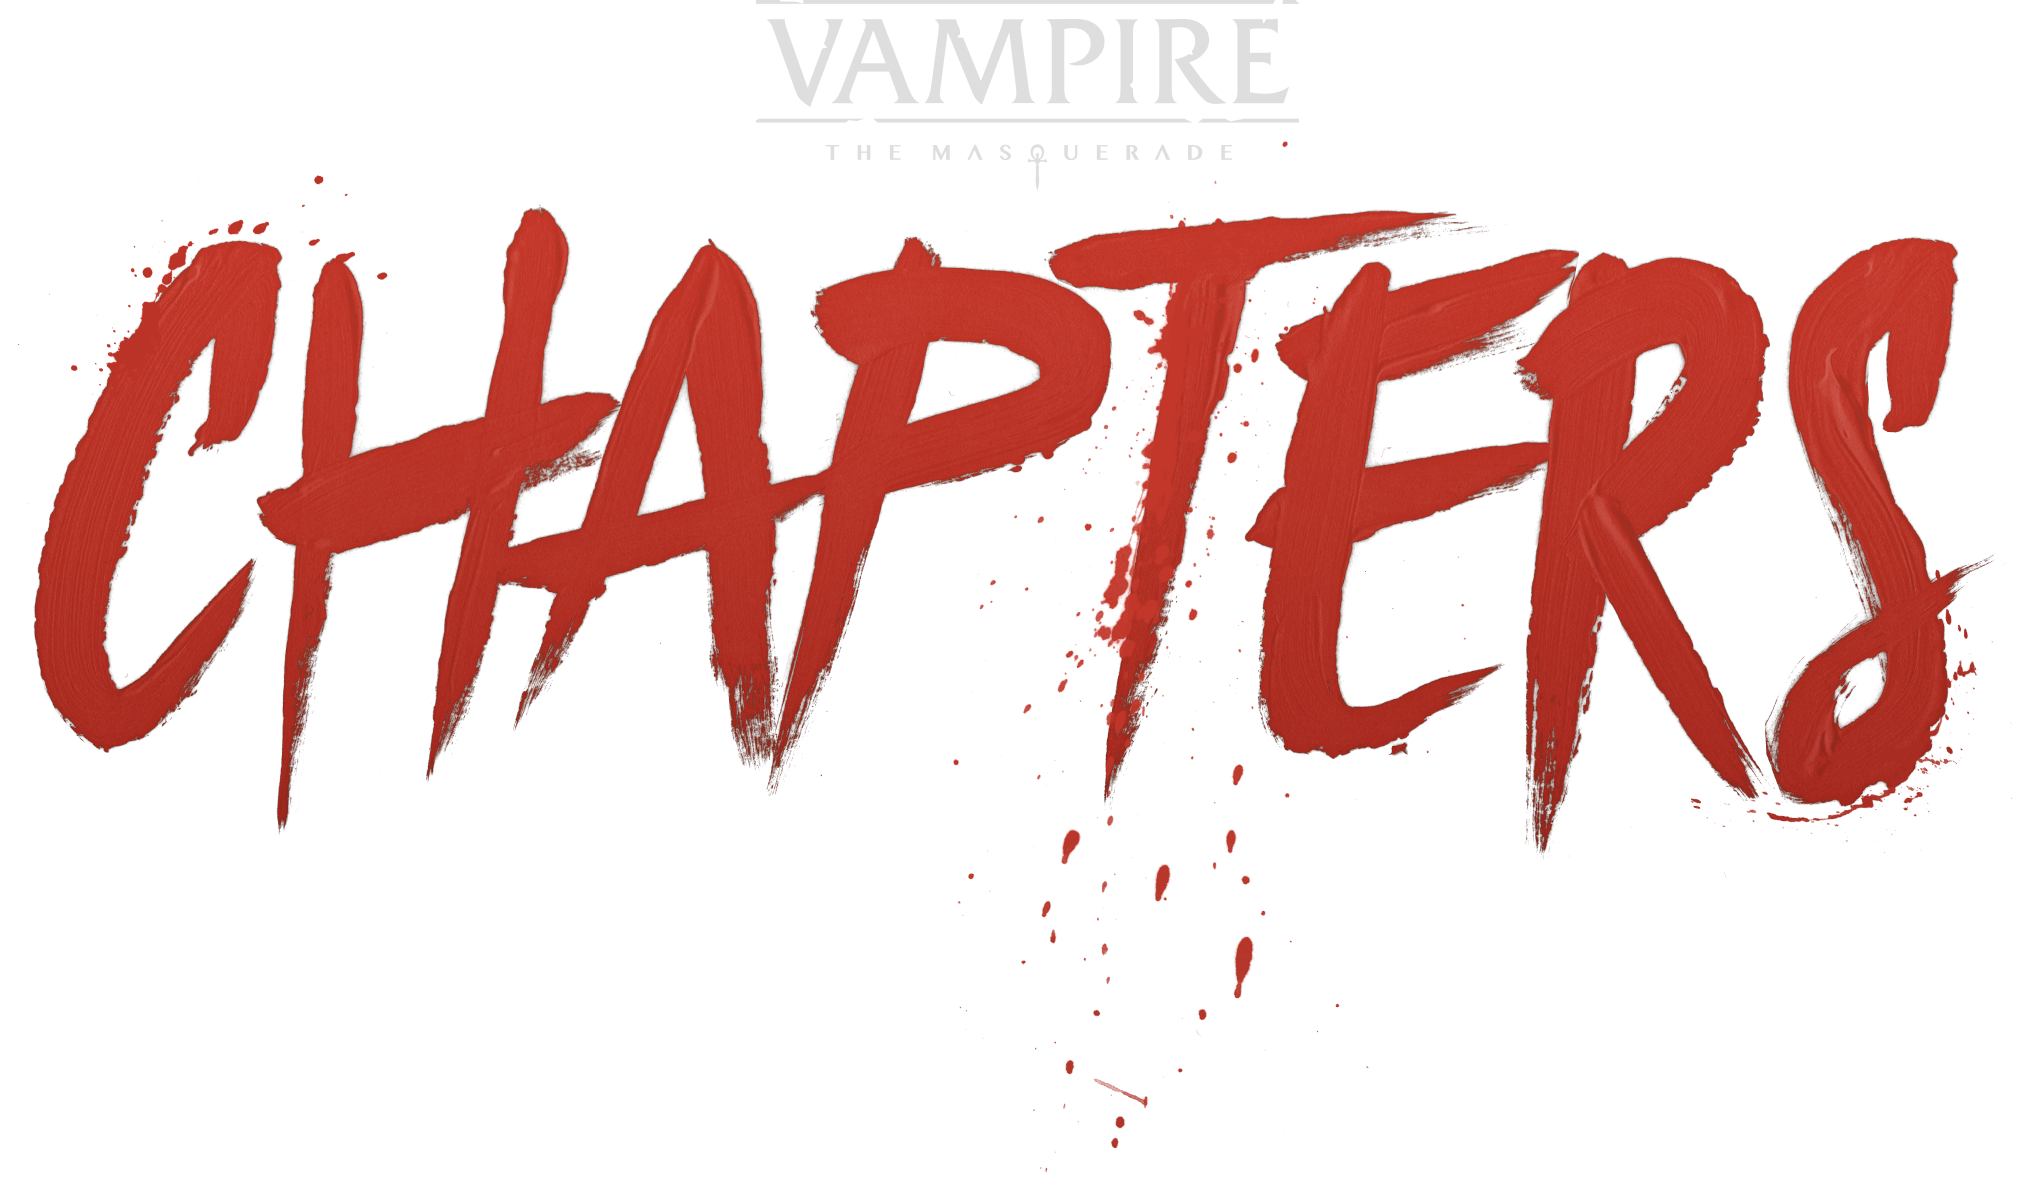  Vampire: The Masquerade - Chapters: Montreal - A